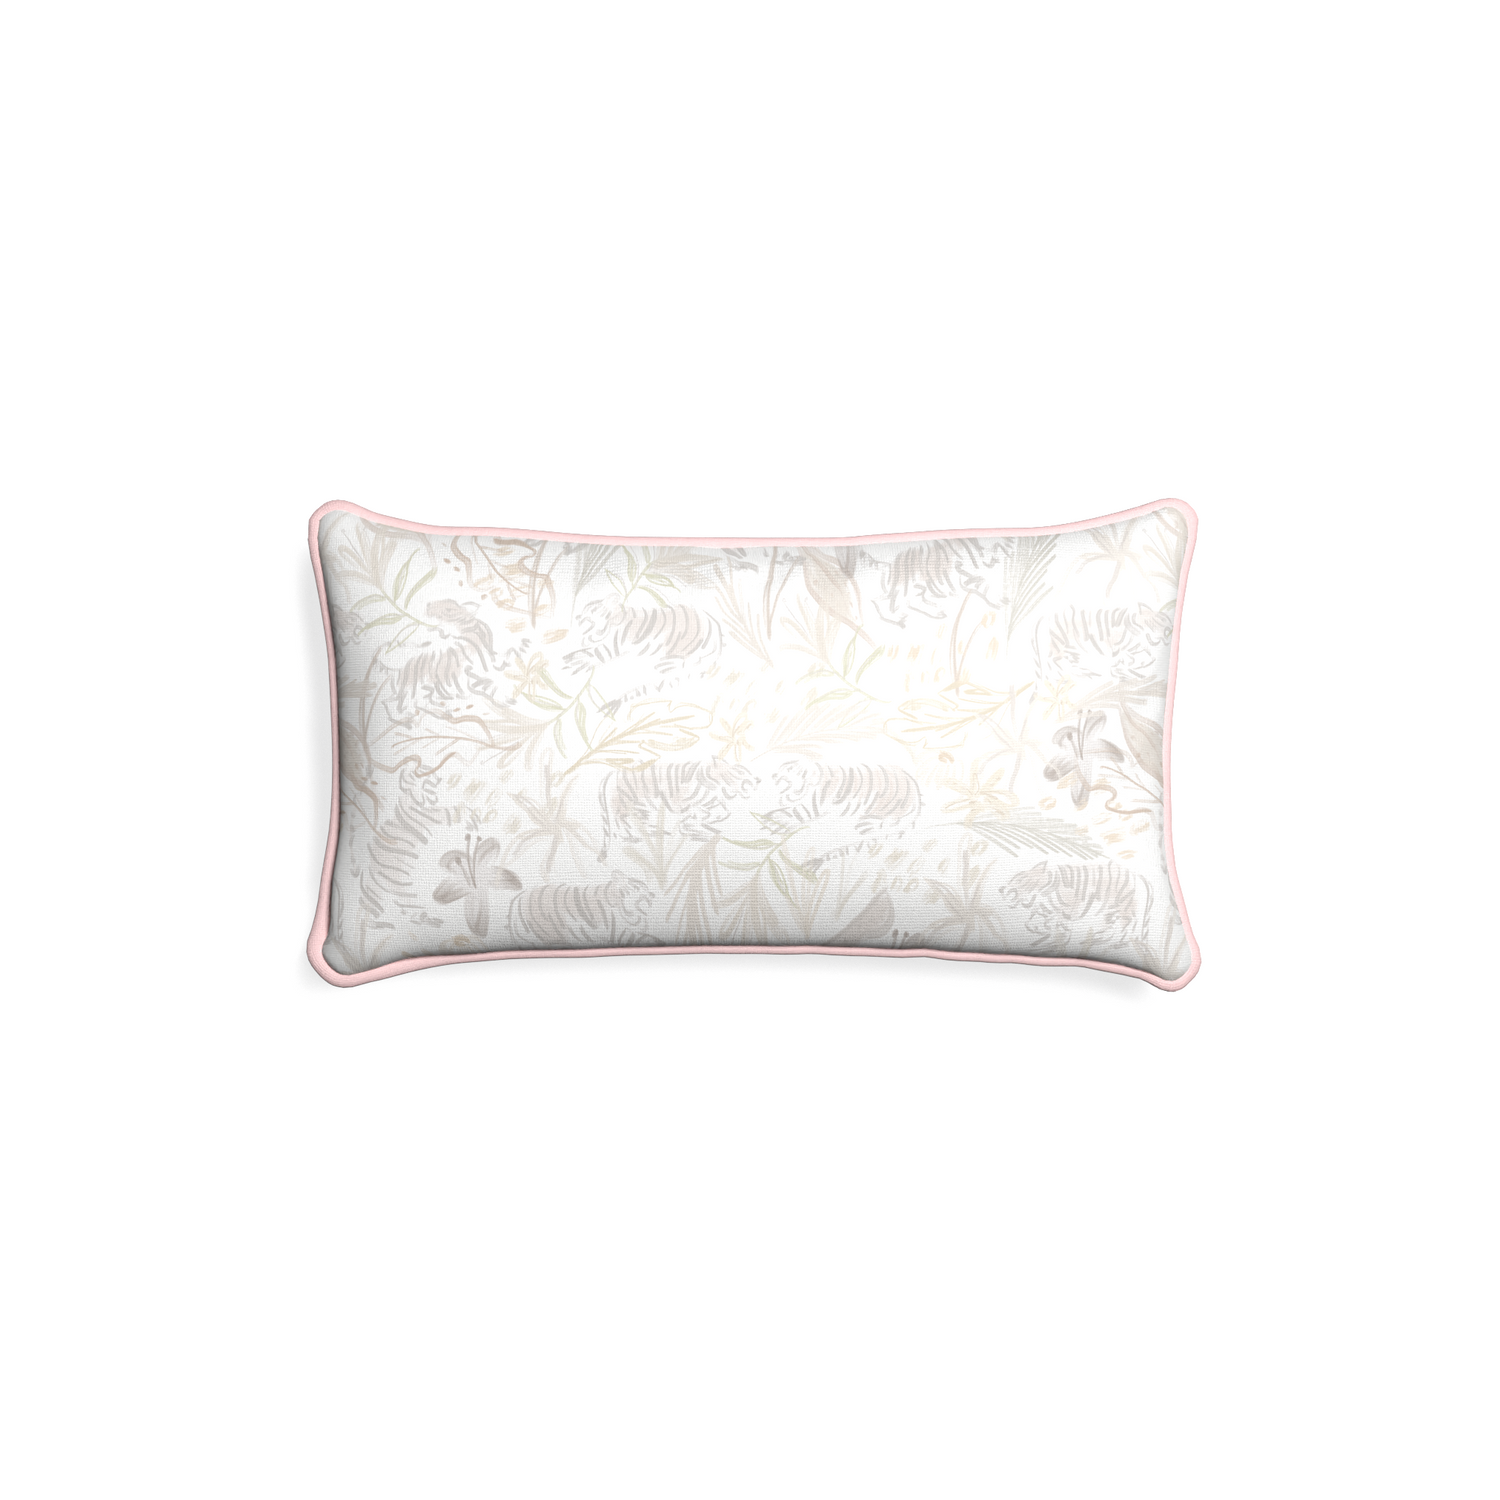 Petite-lumbar frida sand custom beige chinoiserie tigerpillow with petal piping on white background